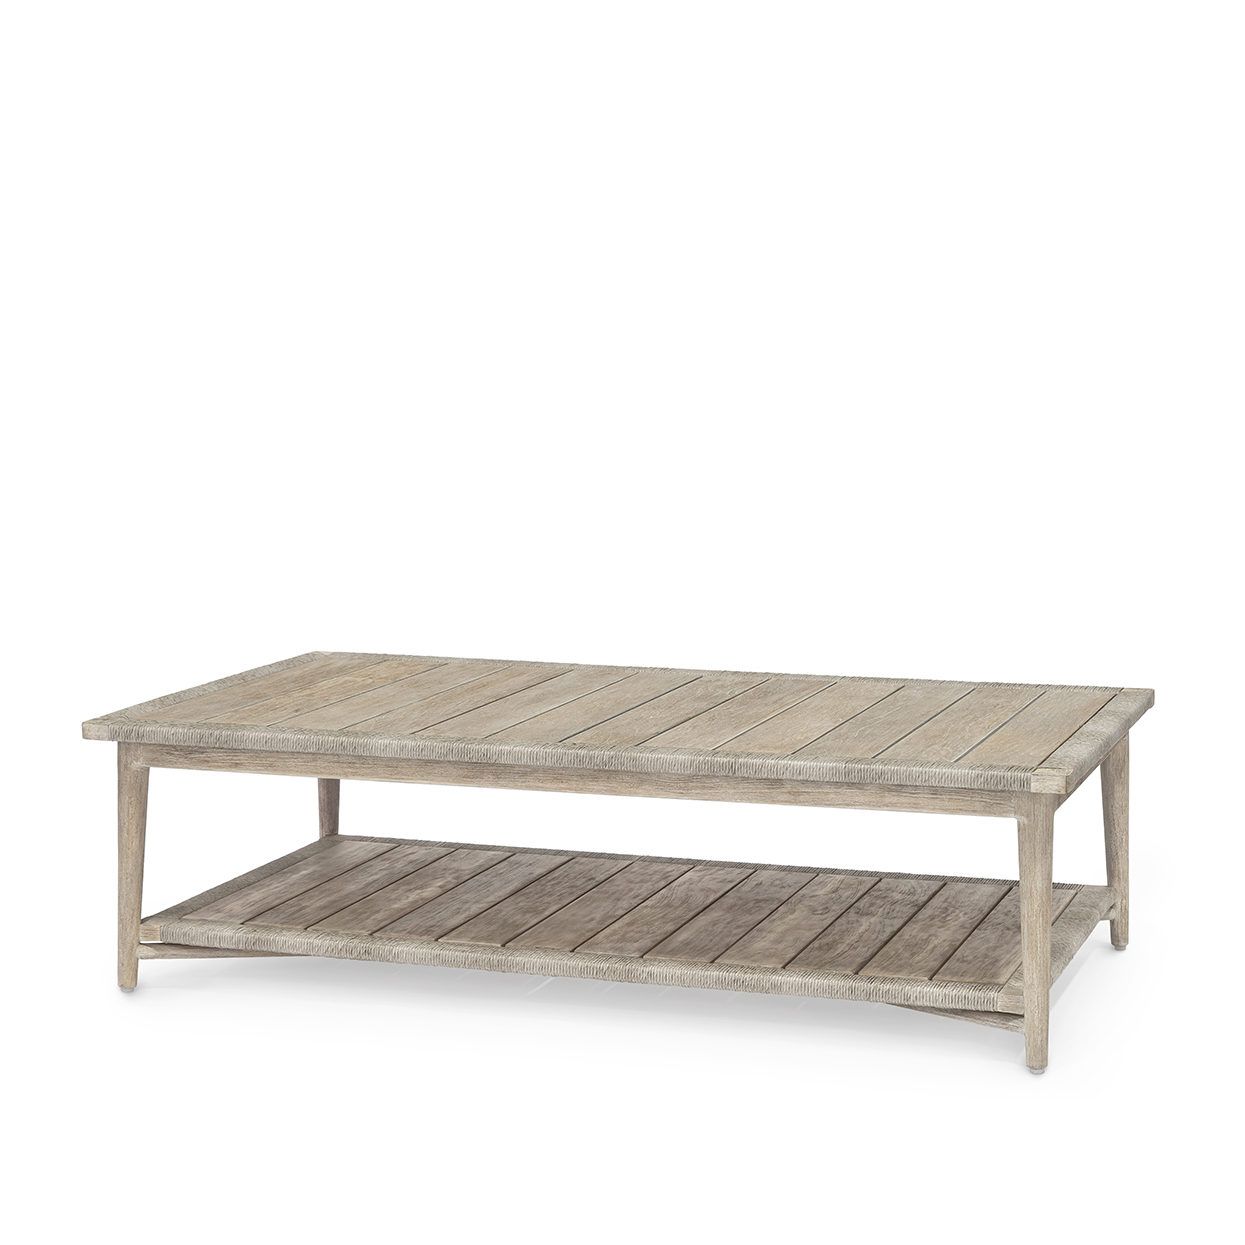 Teak And Abaca Woven Outdoor Coffee Table – Mecox Gardens Throughout Woven Paths Coffee Tables (View 18 of 20)